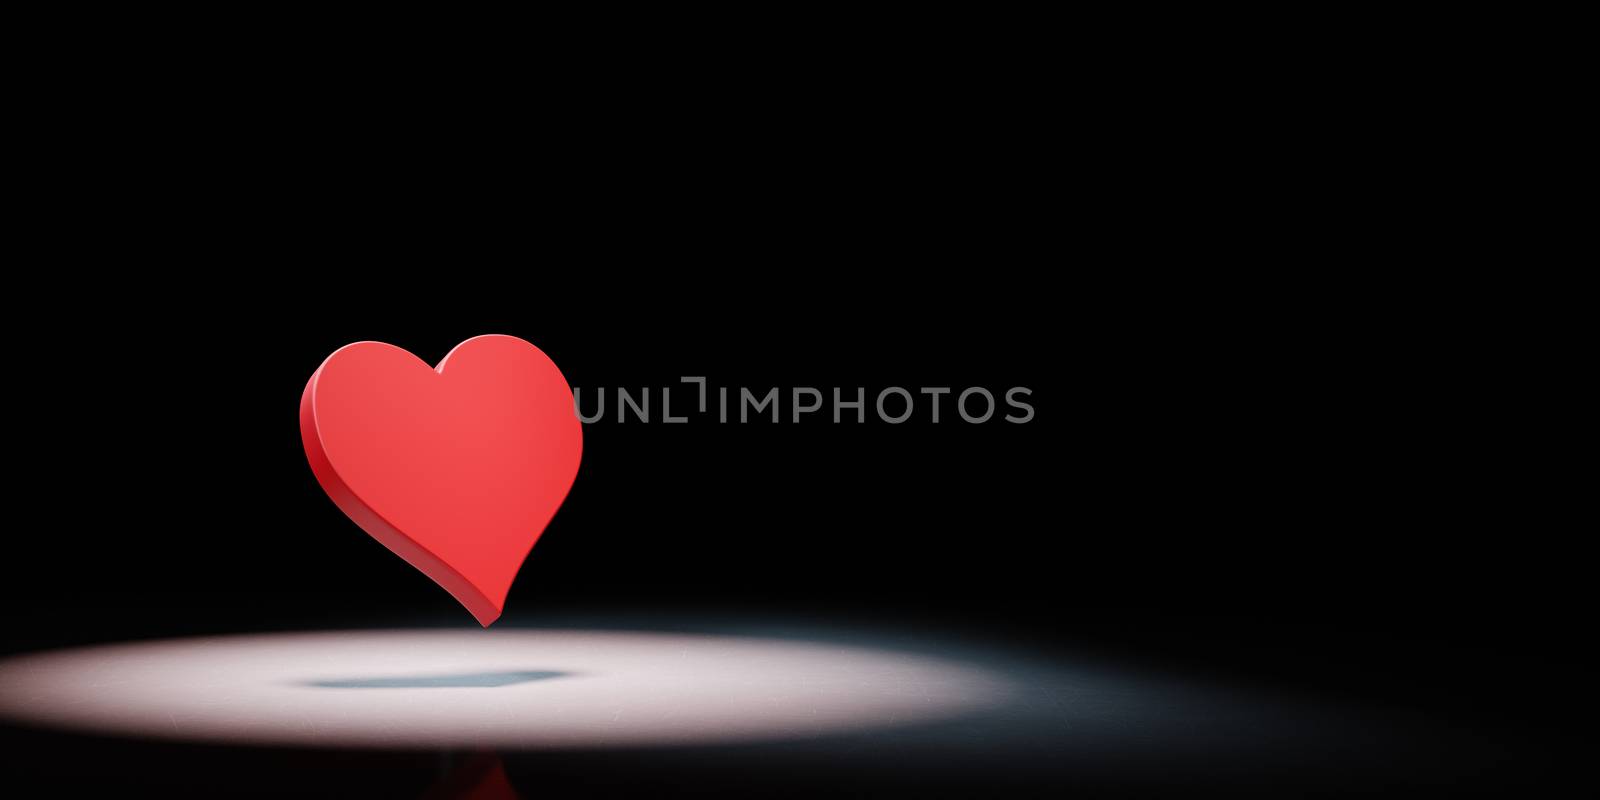 Red Heart Symbol Shape Spotlighted on Black Background with Copy Space 3D Illustration